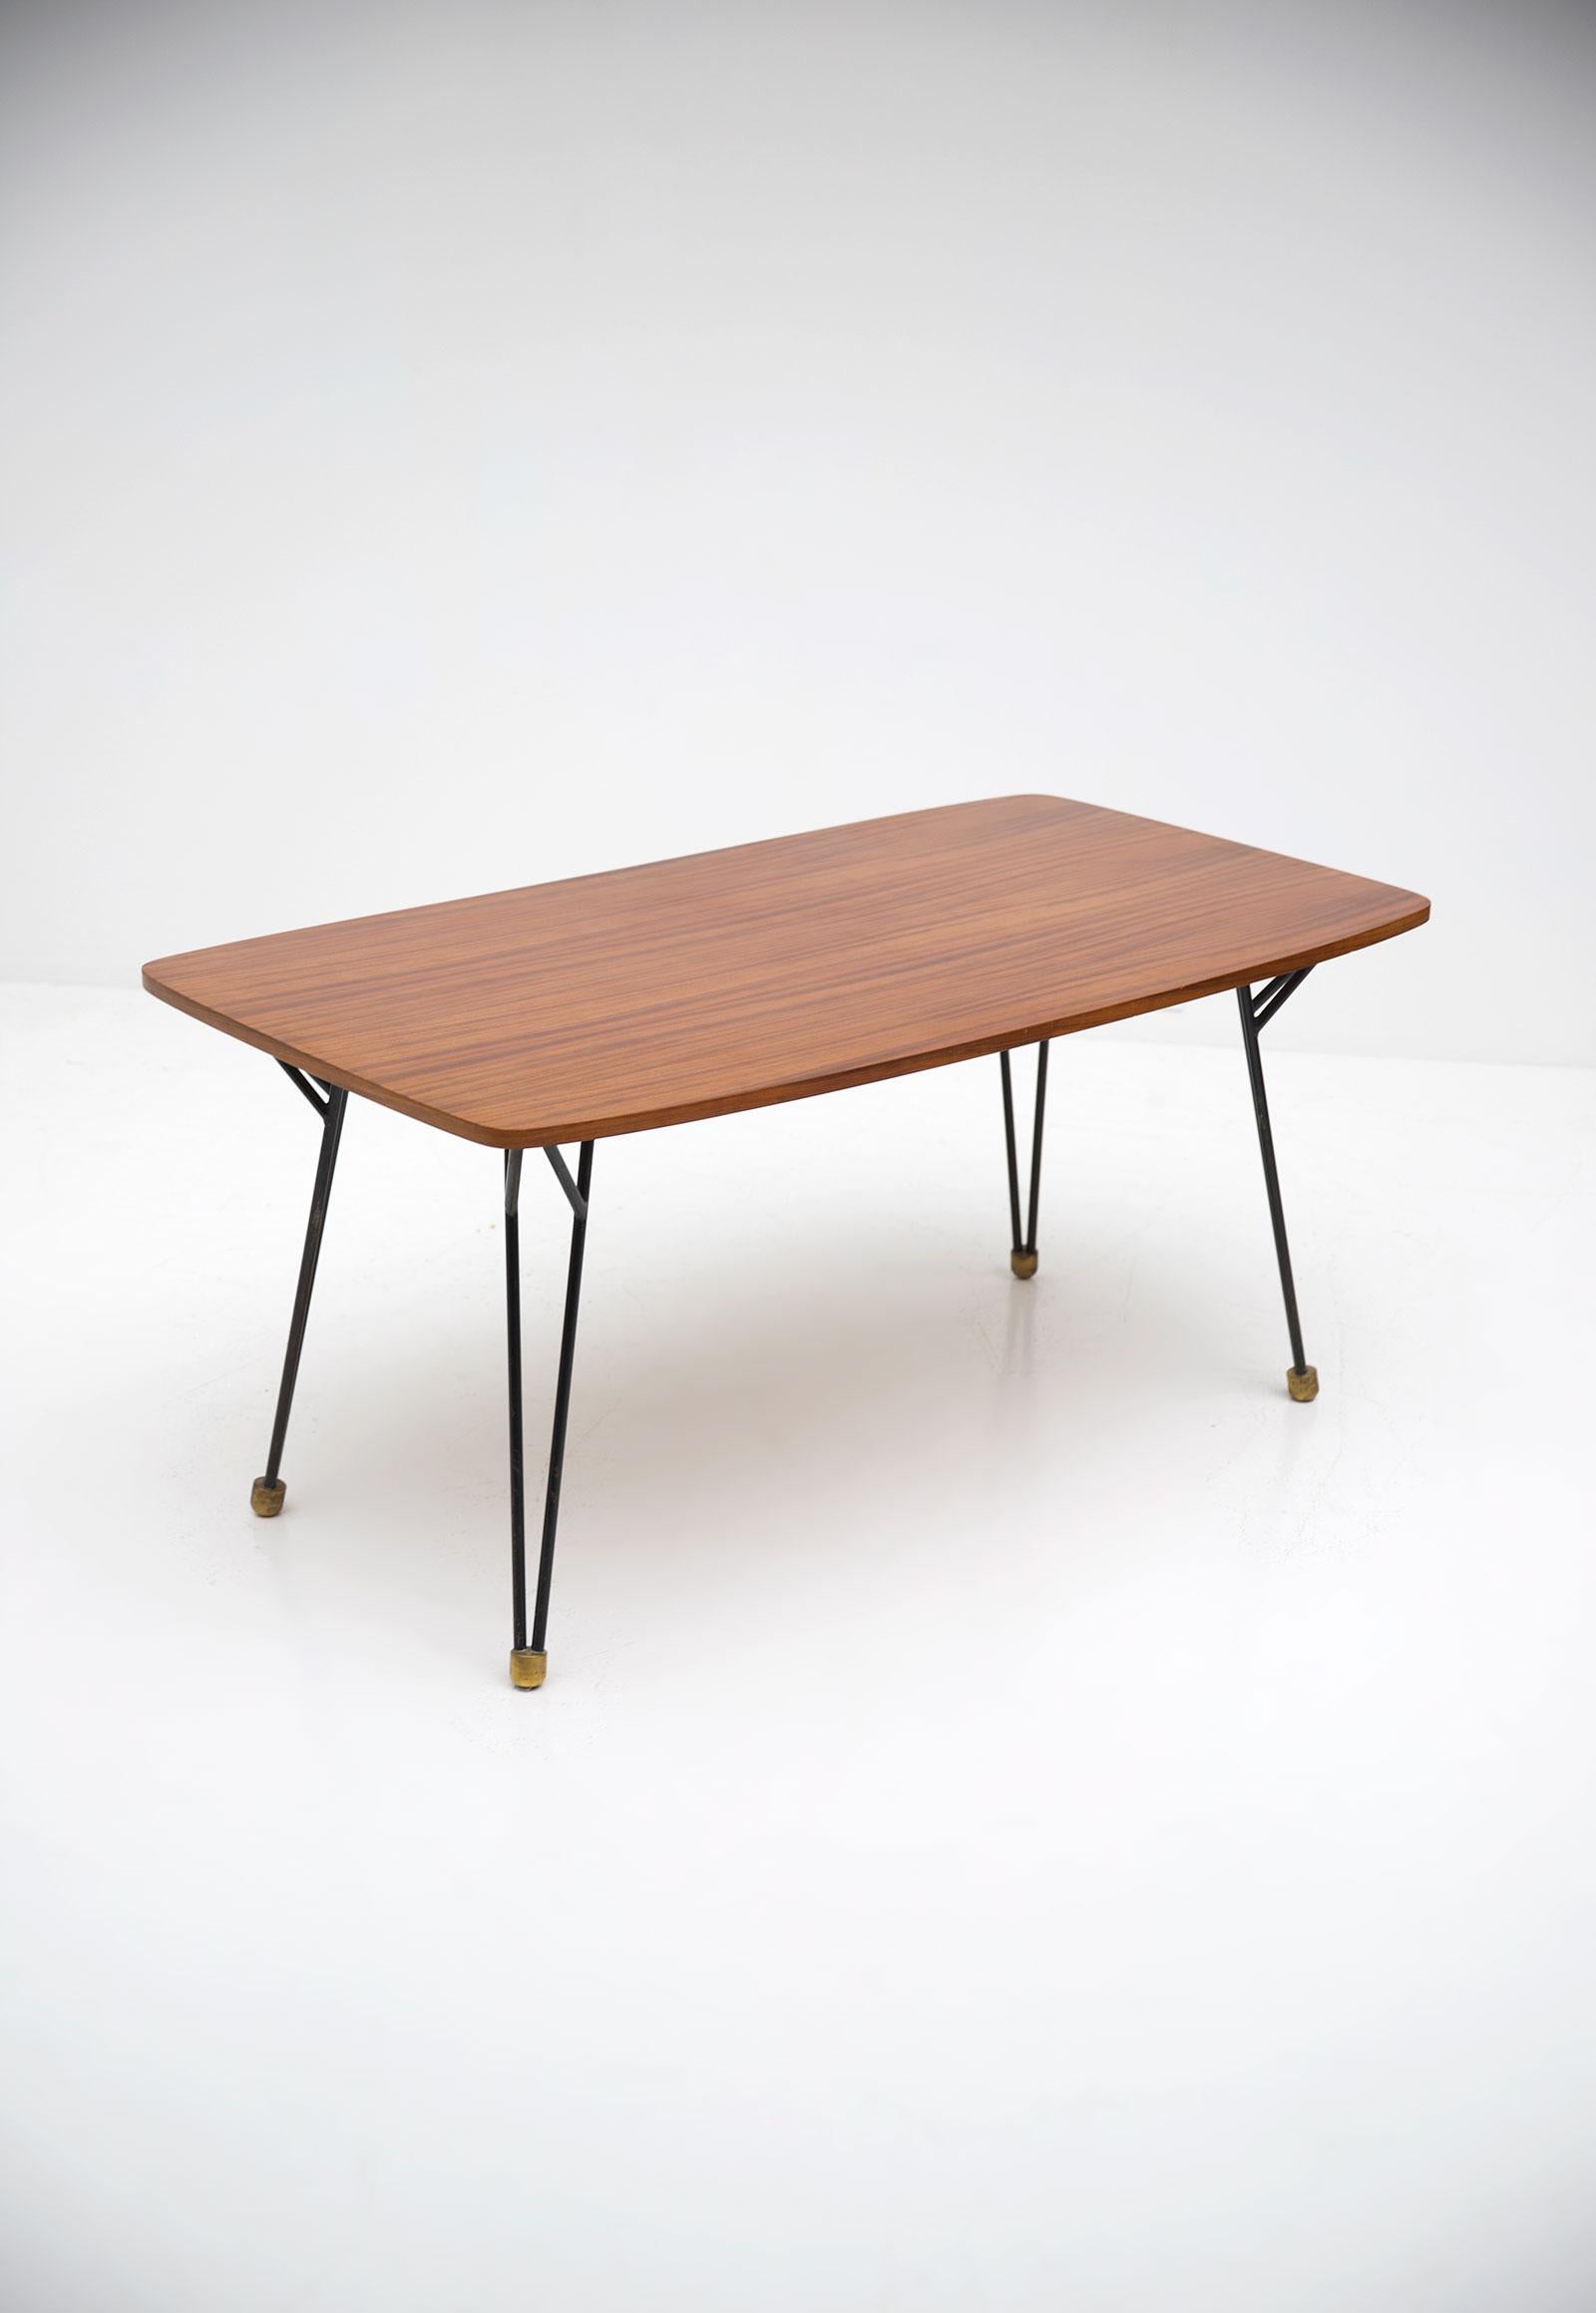 Rare T3 dining table designed by Alfred Hendrickx and made by Belform in the 50s. The table has a nice wood grain table top and a black lacquered metal frame detailed with four full brass feet. This table is very rare and hard to find. A highly